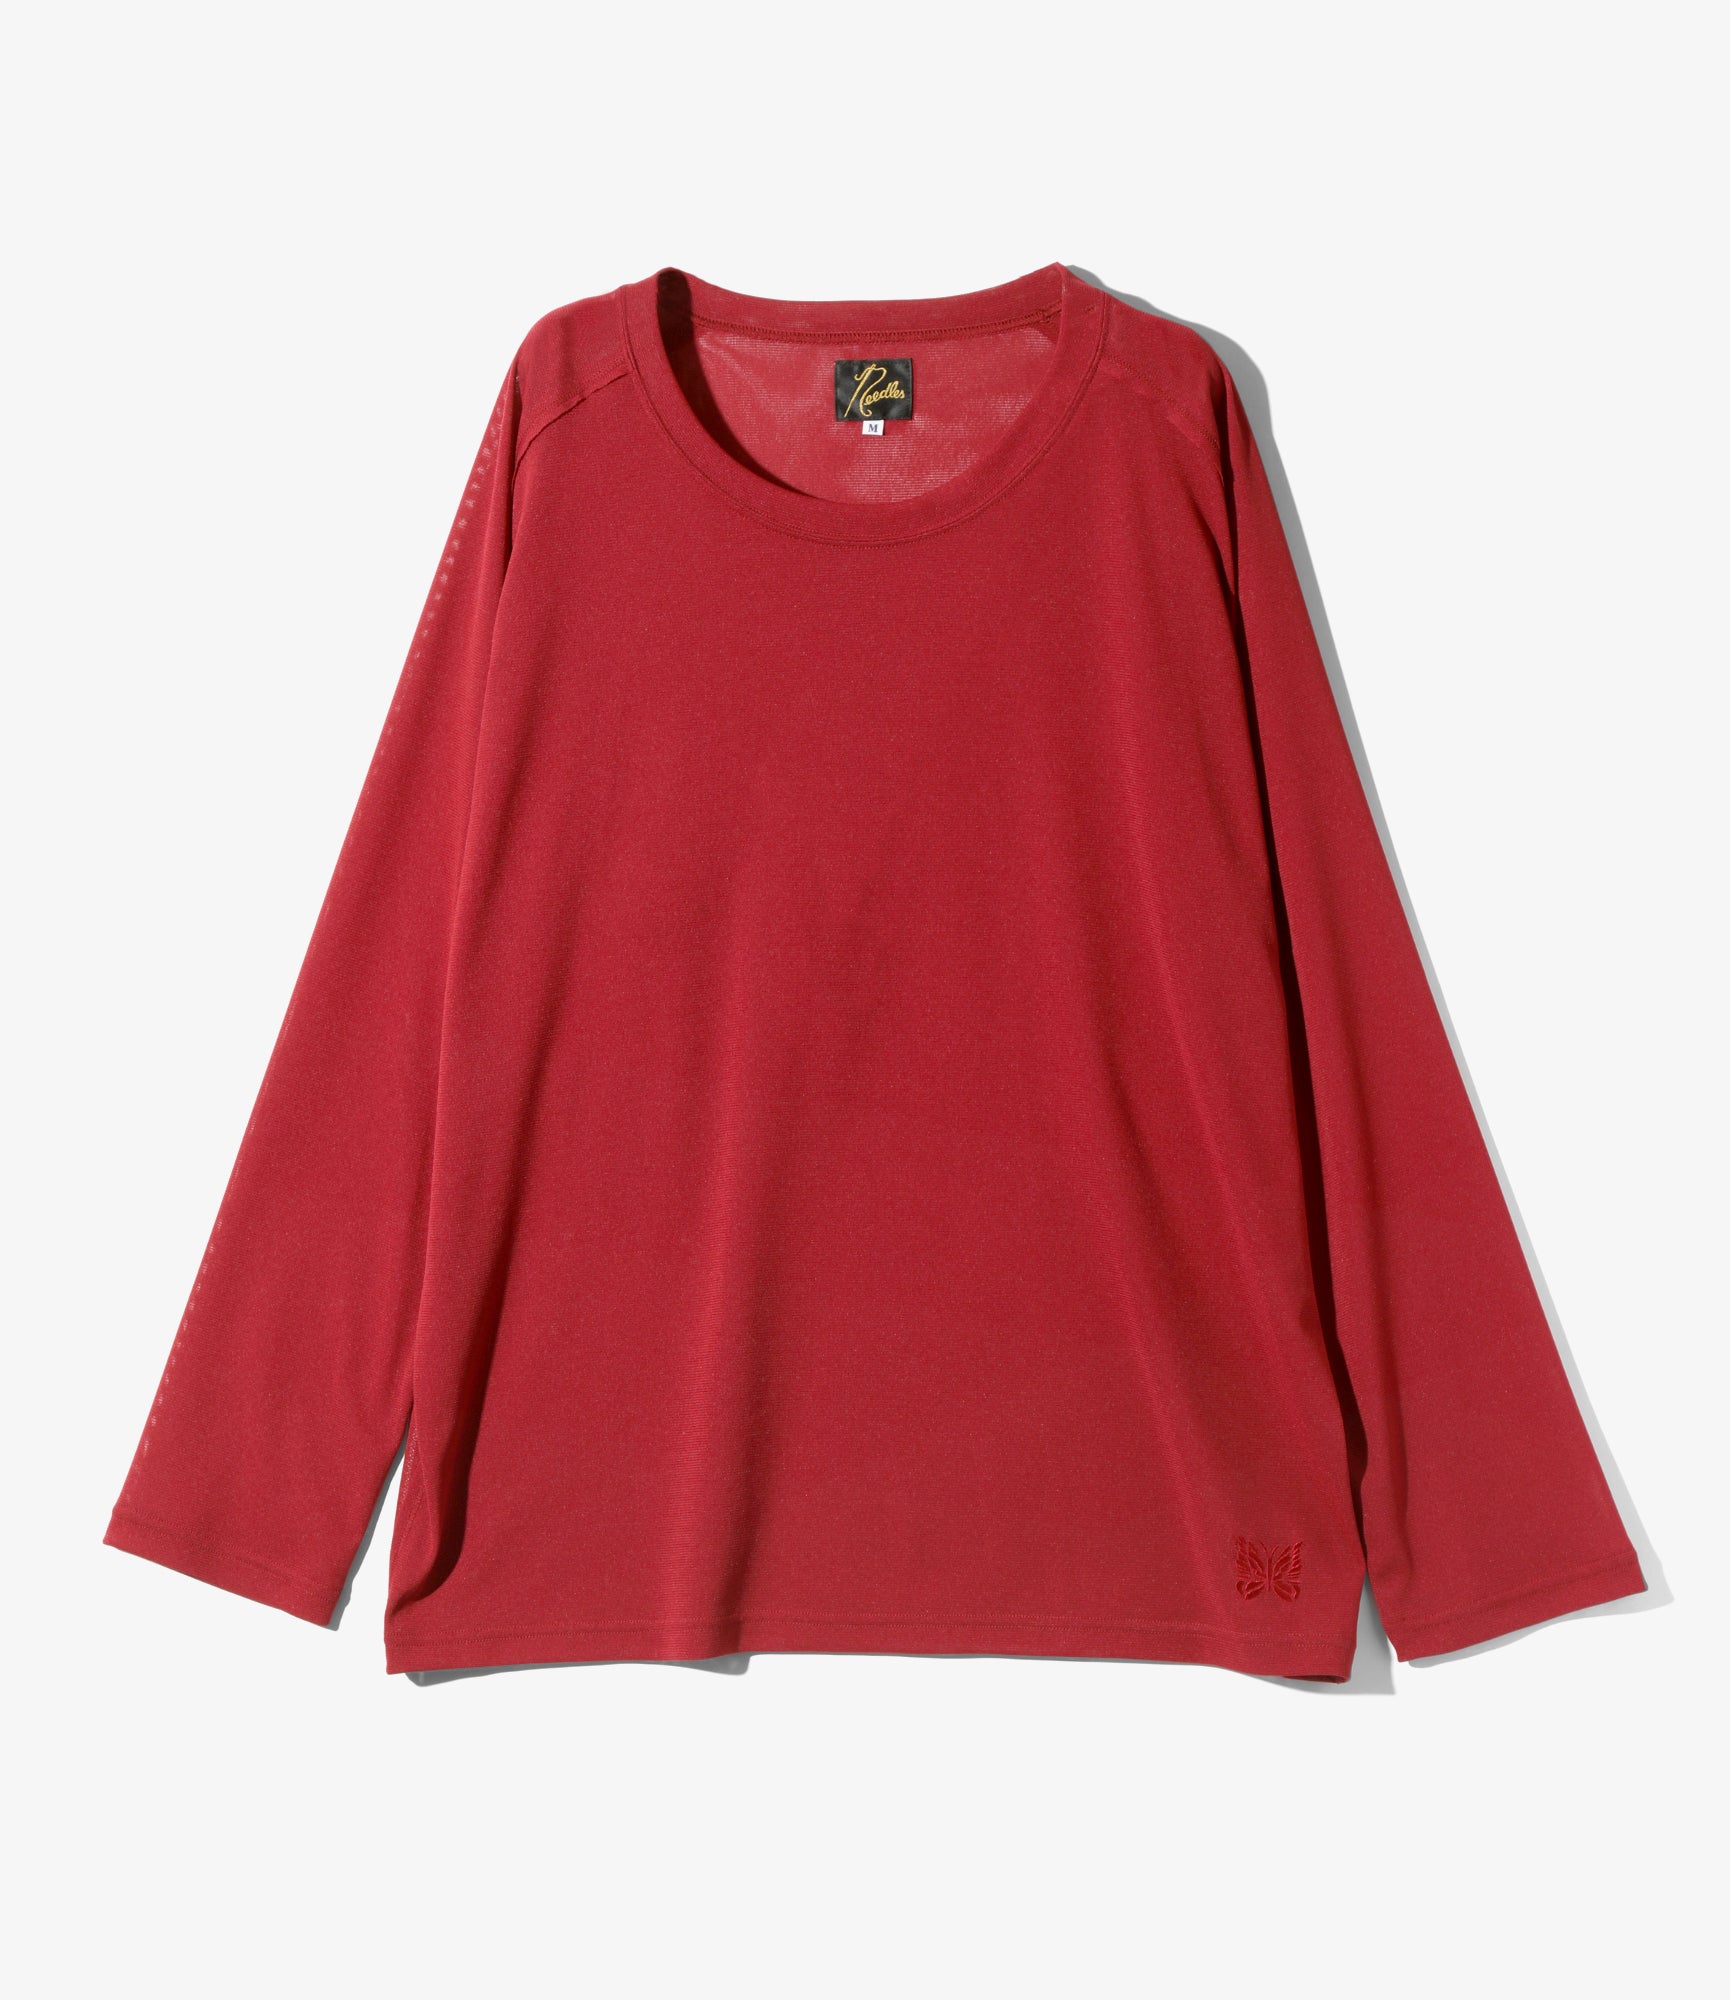 L/S U Neck Tee - Red - Poly Mesh